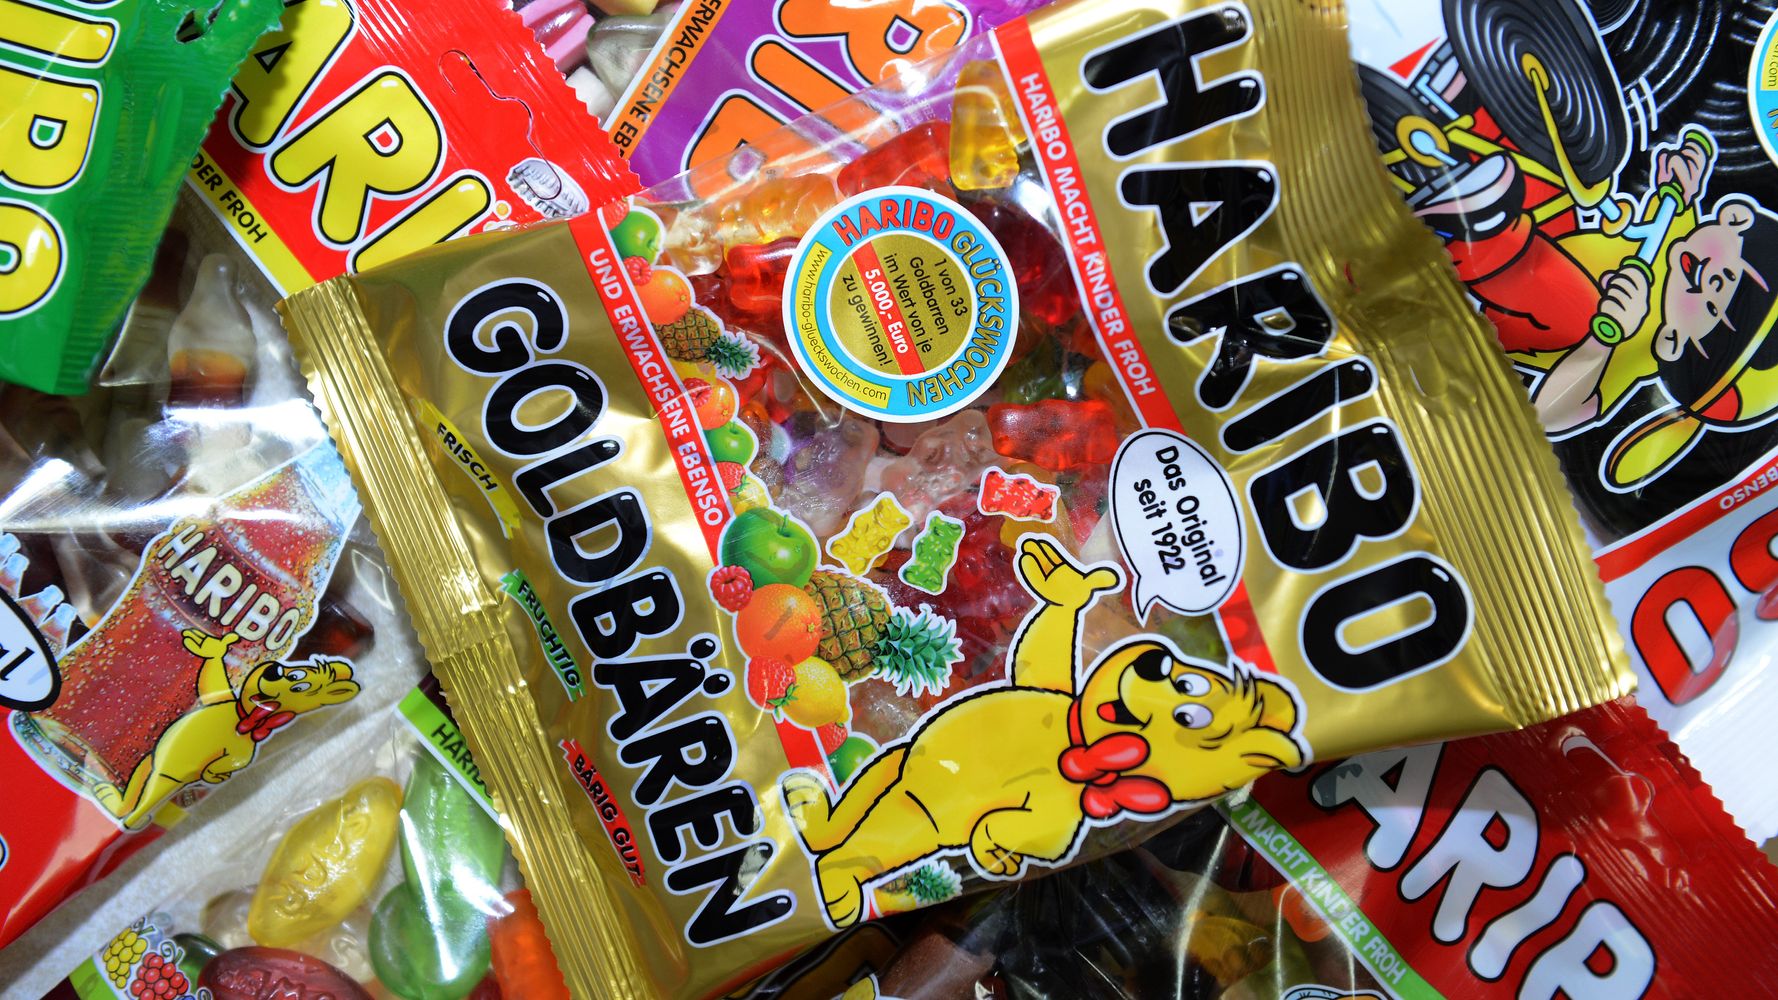 Hungarian Gummy bear parody about condoms is marked for kids :  r/kidsgore